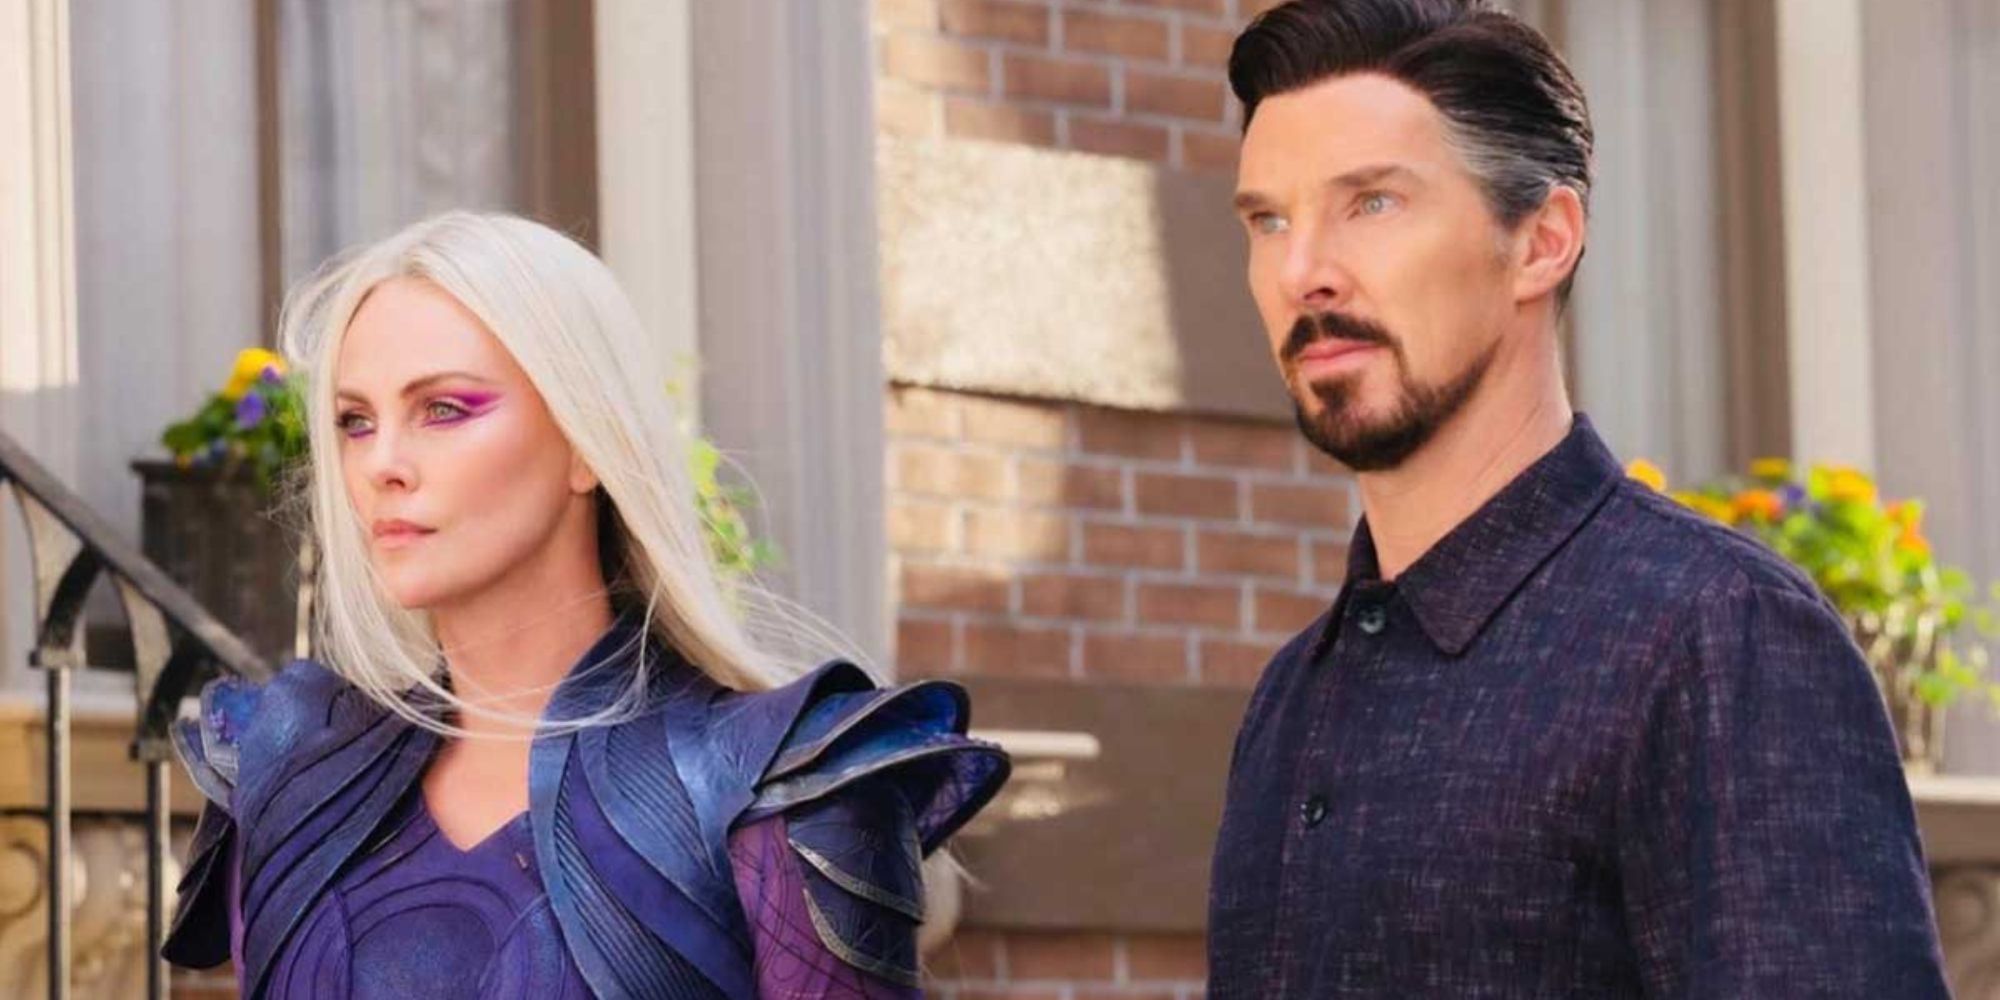 Clea and Doctor Strange appear in Multiverse of Madness.